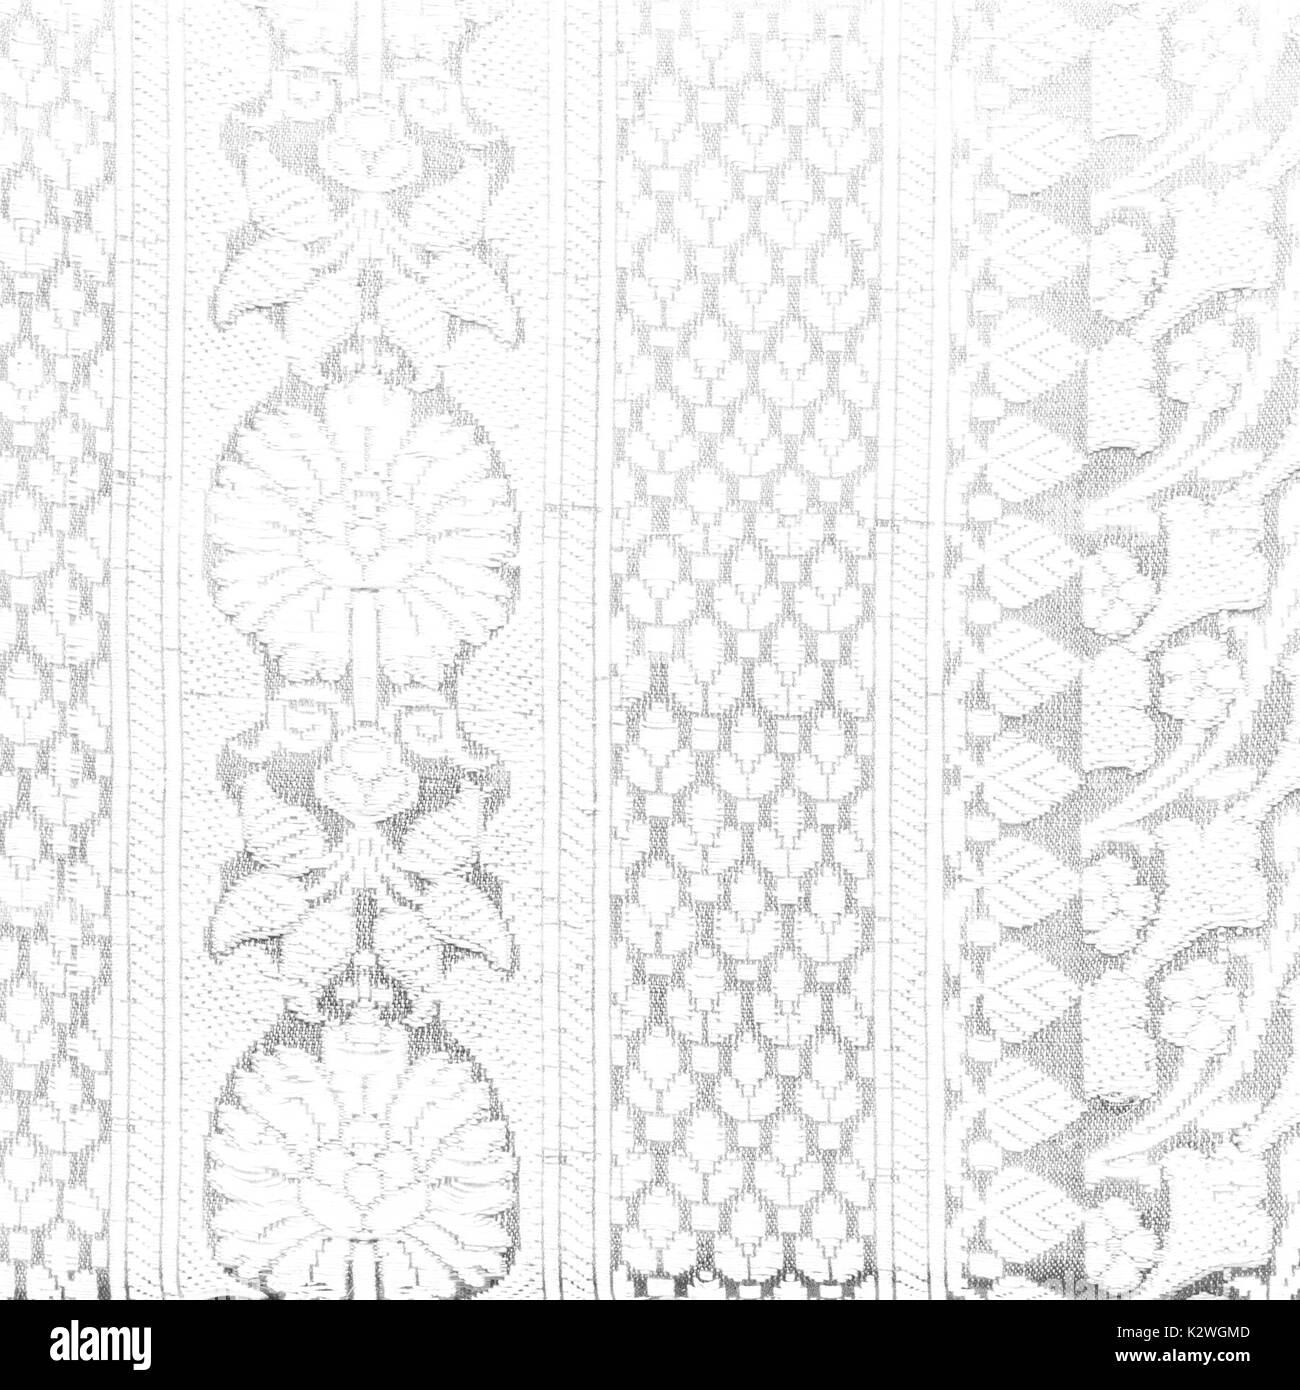 Traditional Indian fabric texture black and white with patterns can be used as background. Stock Photo